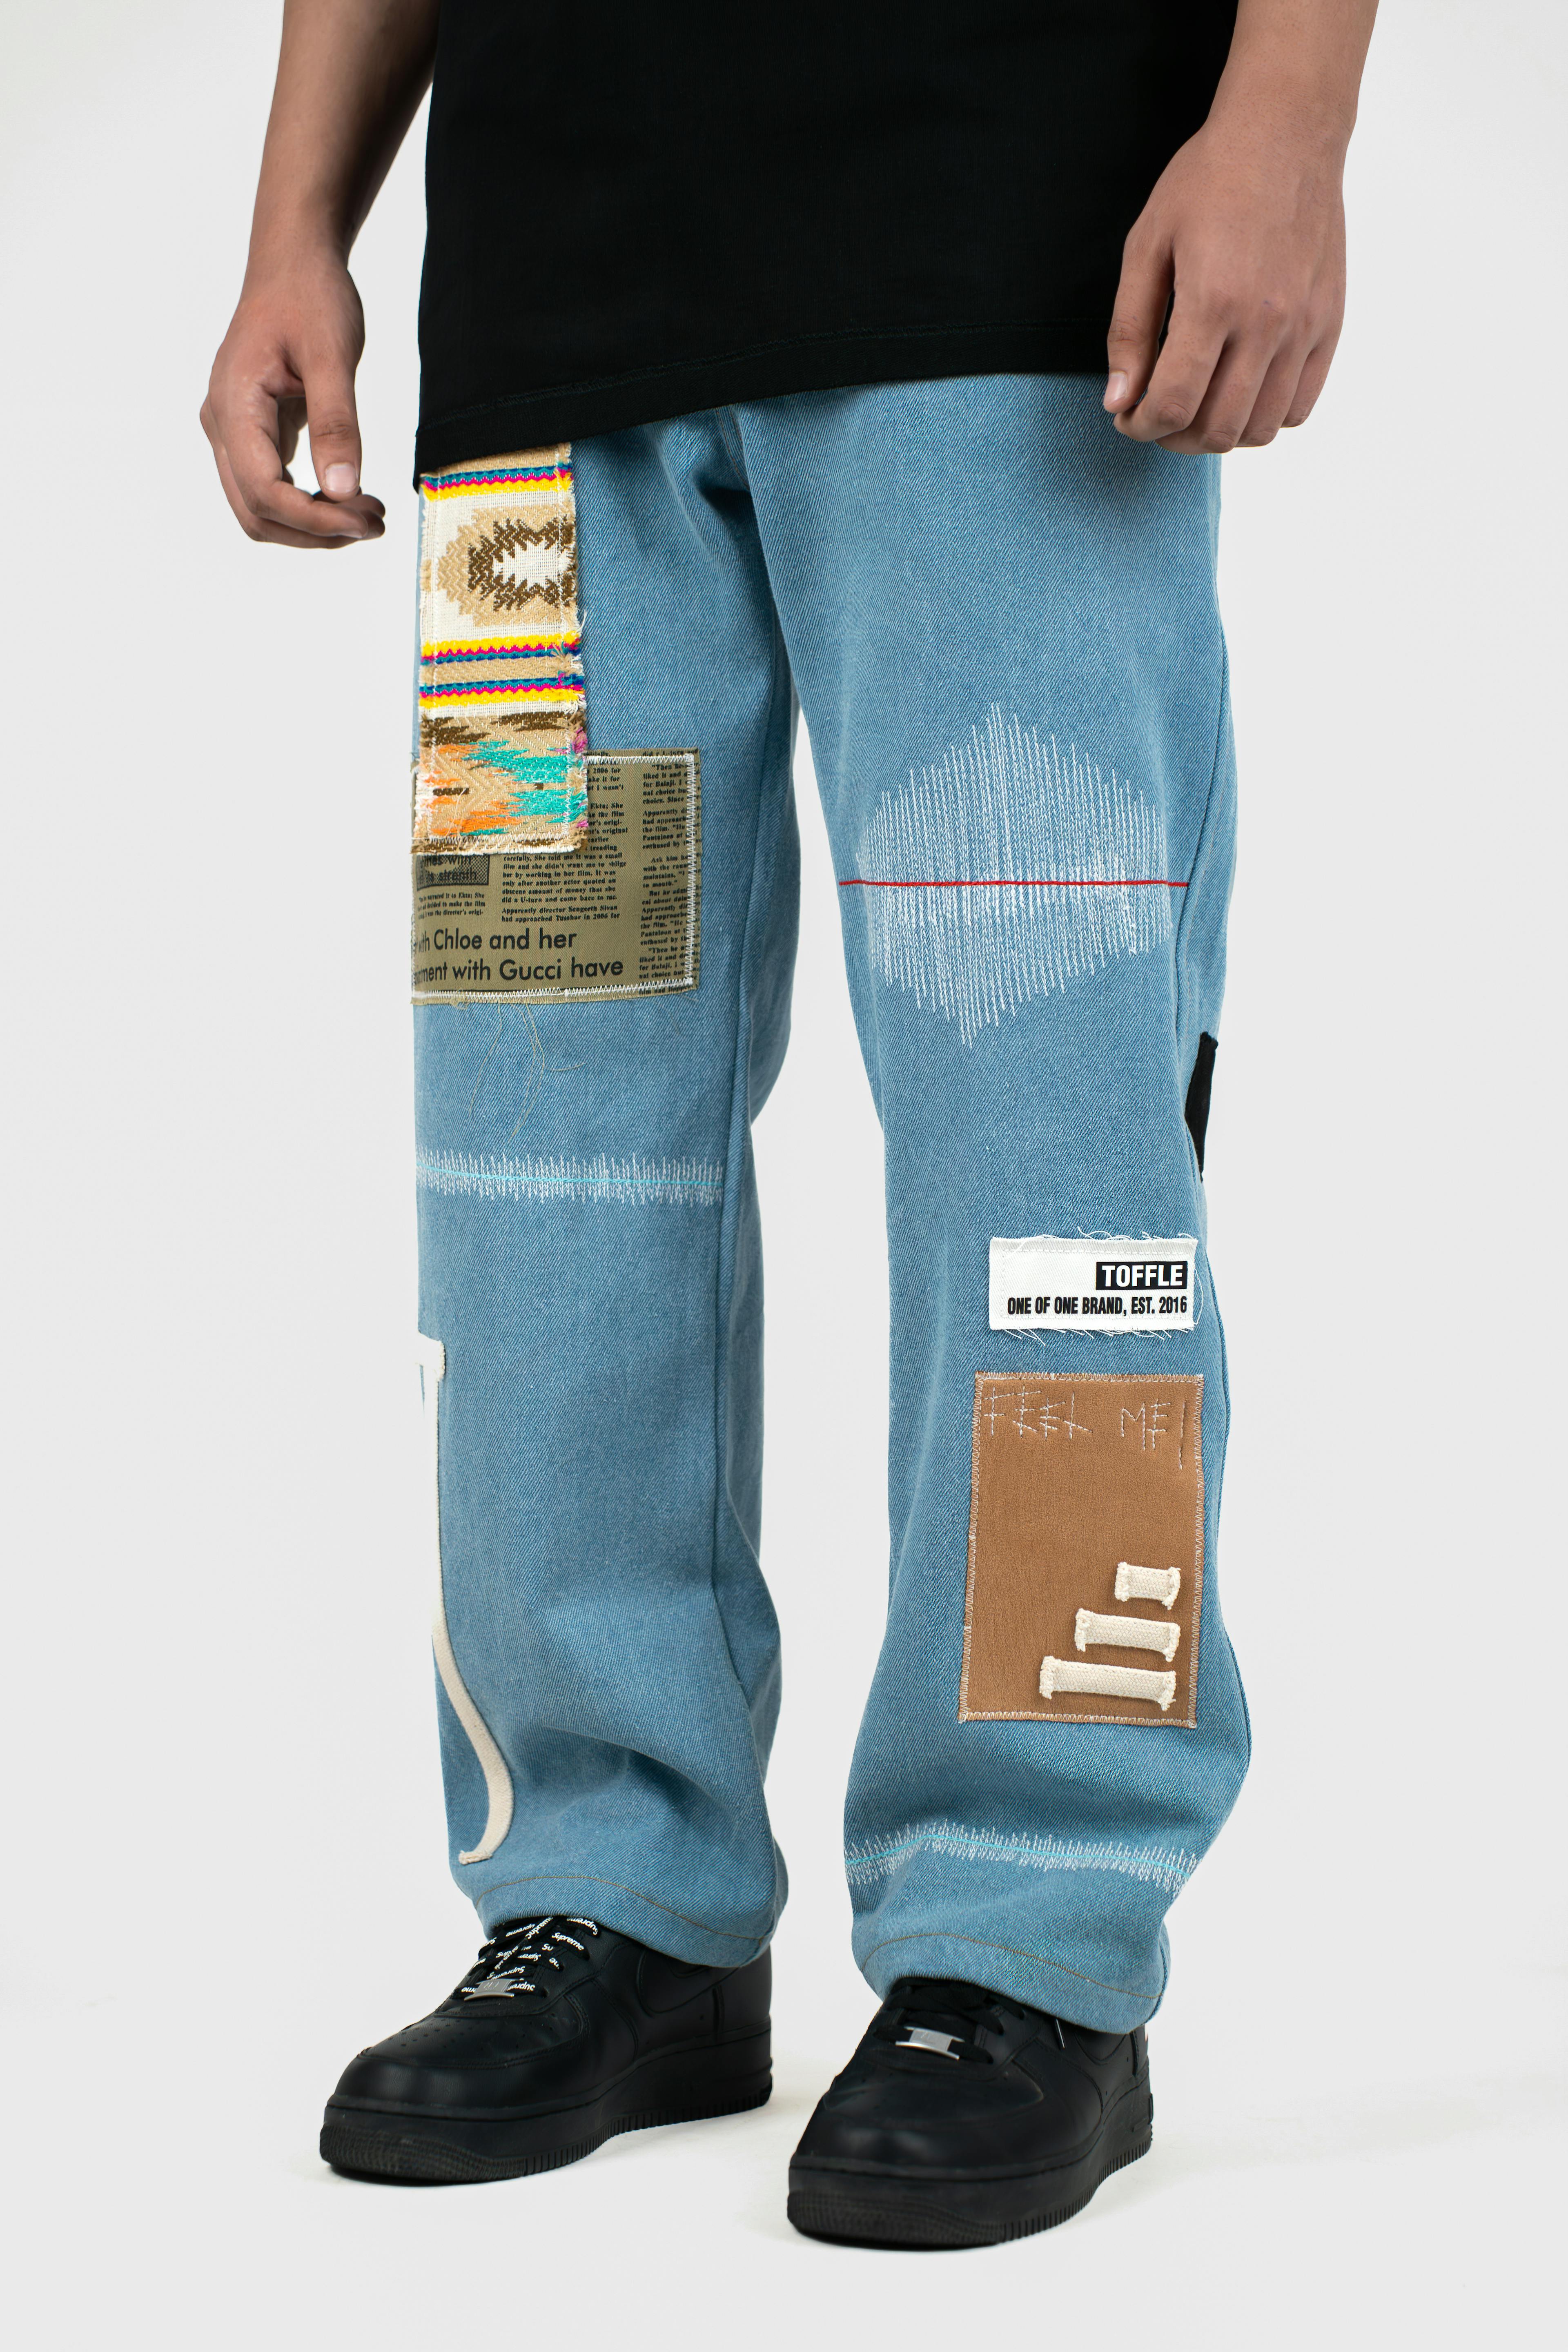 Earthtone Blue Denim Jeans, a product by TOFFLE